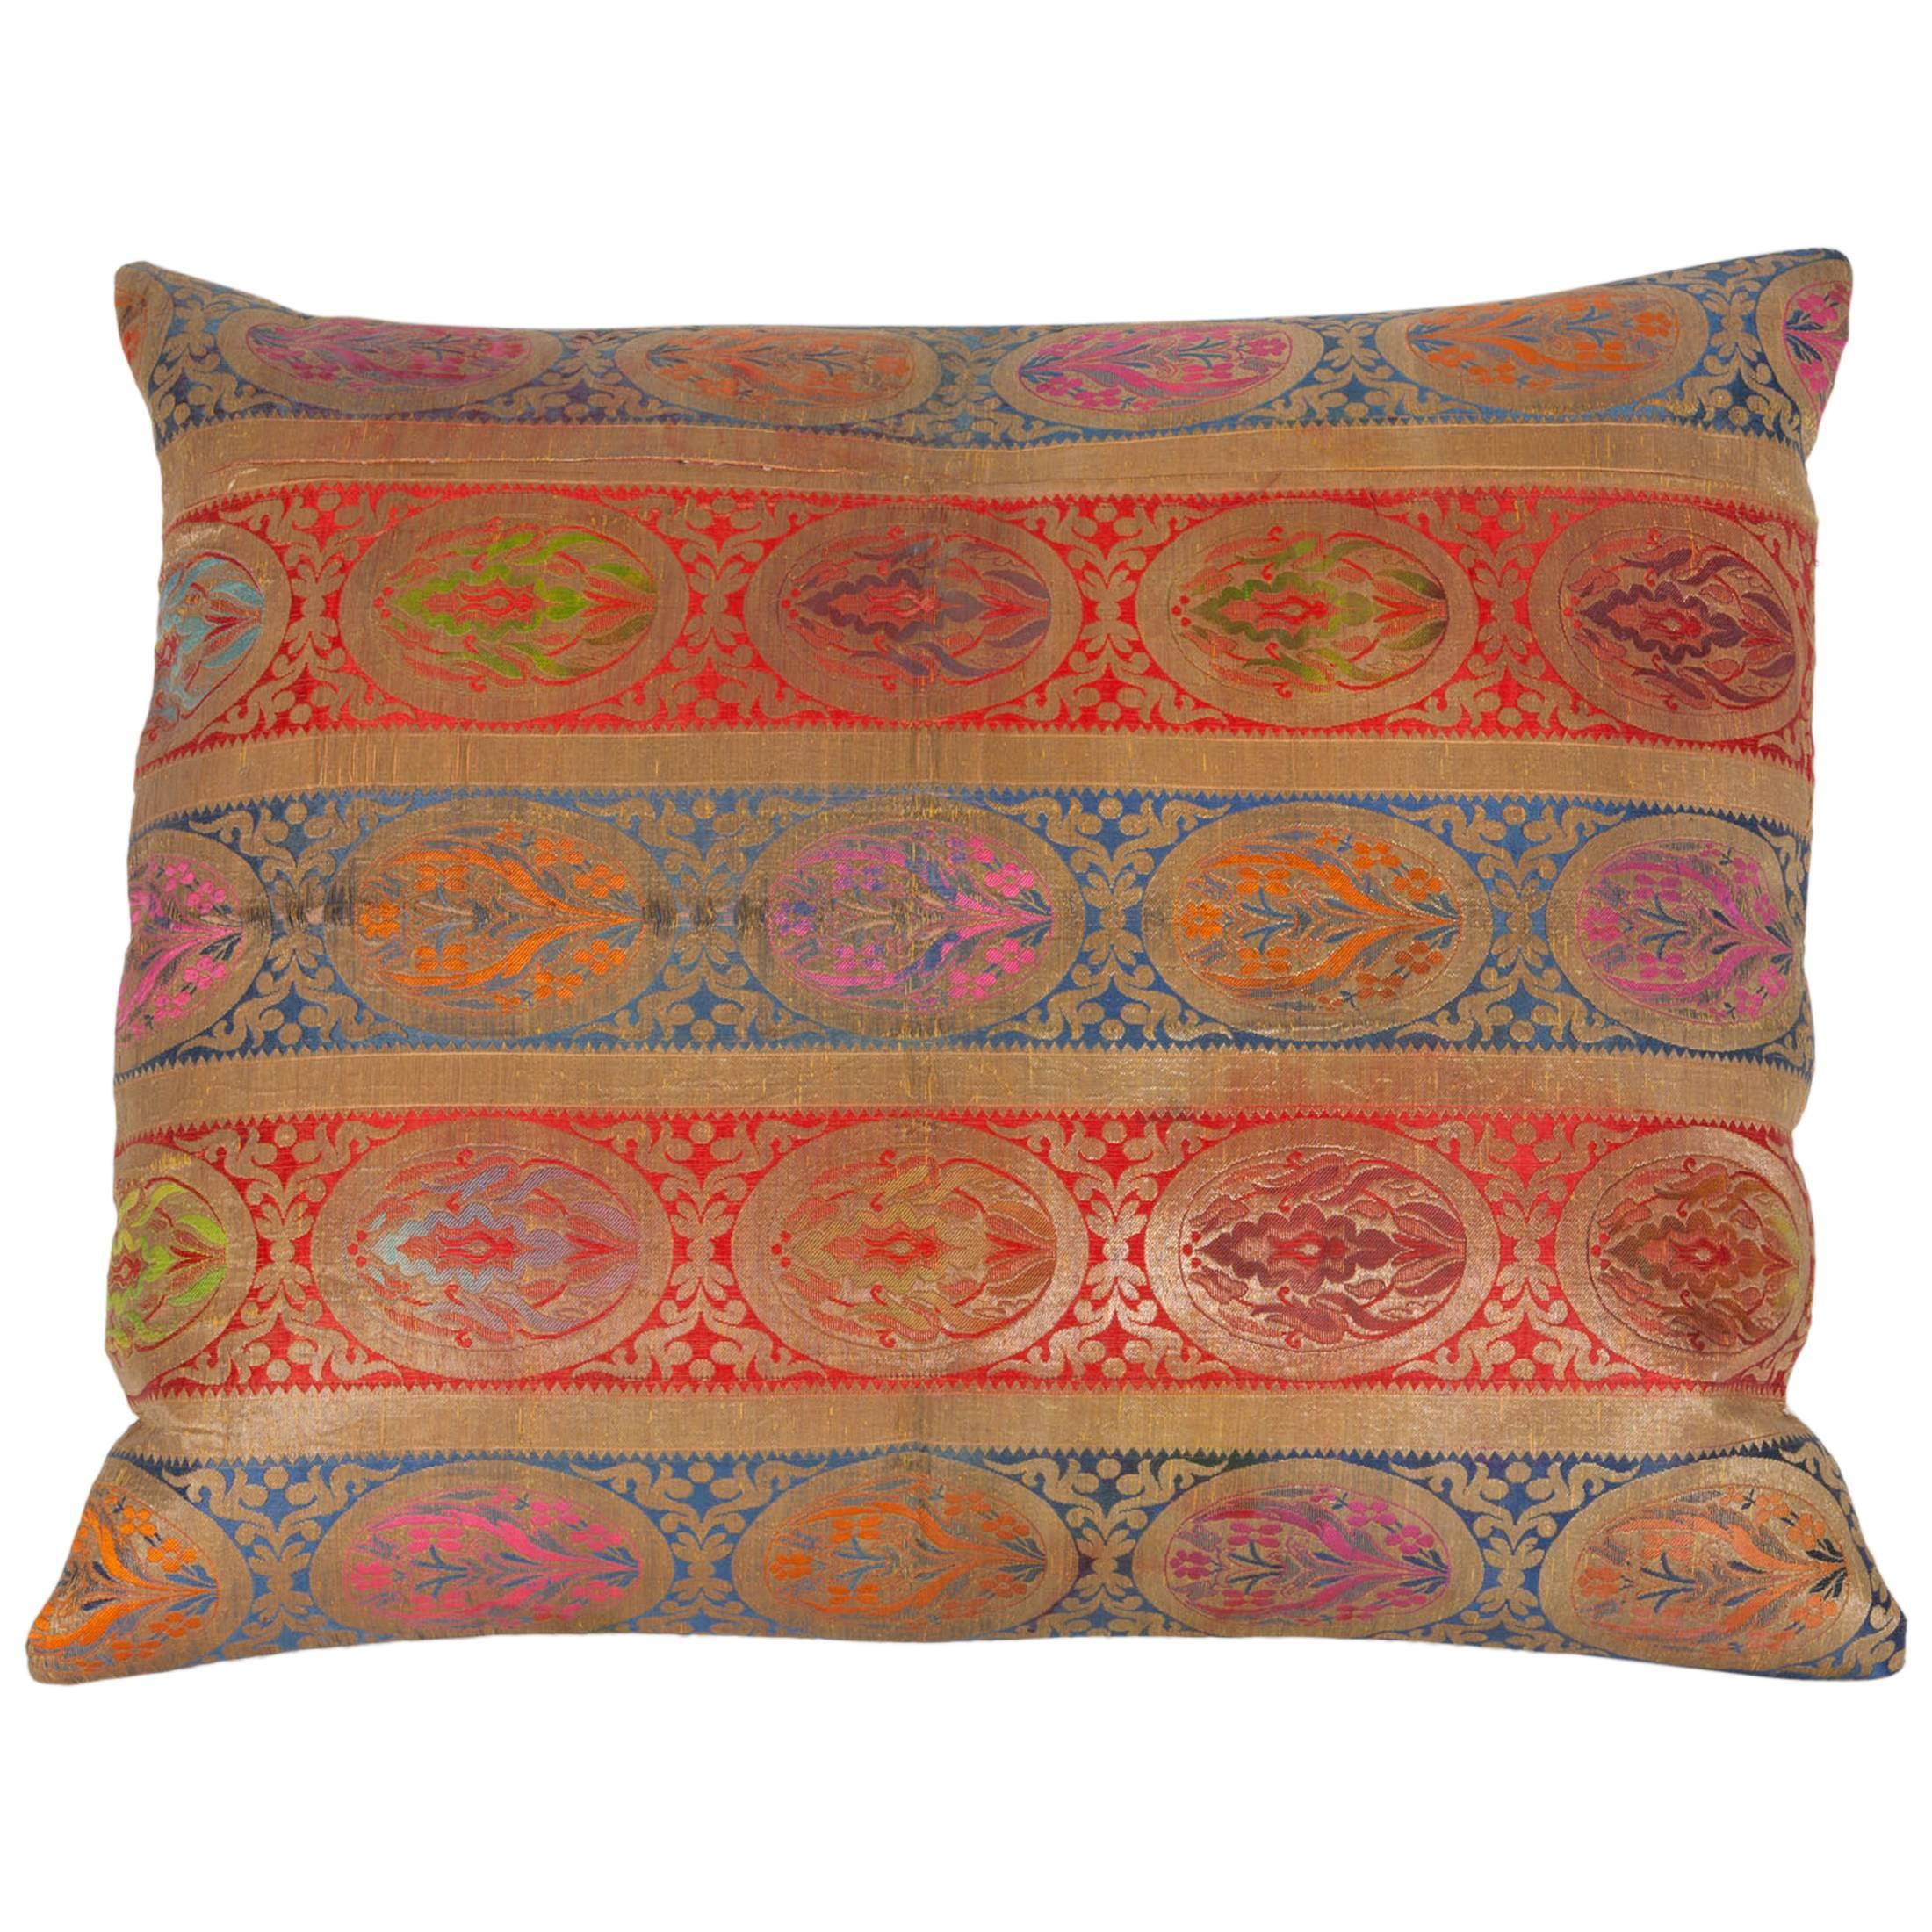 Early 20th Century Central Asian Brocaded Pillow